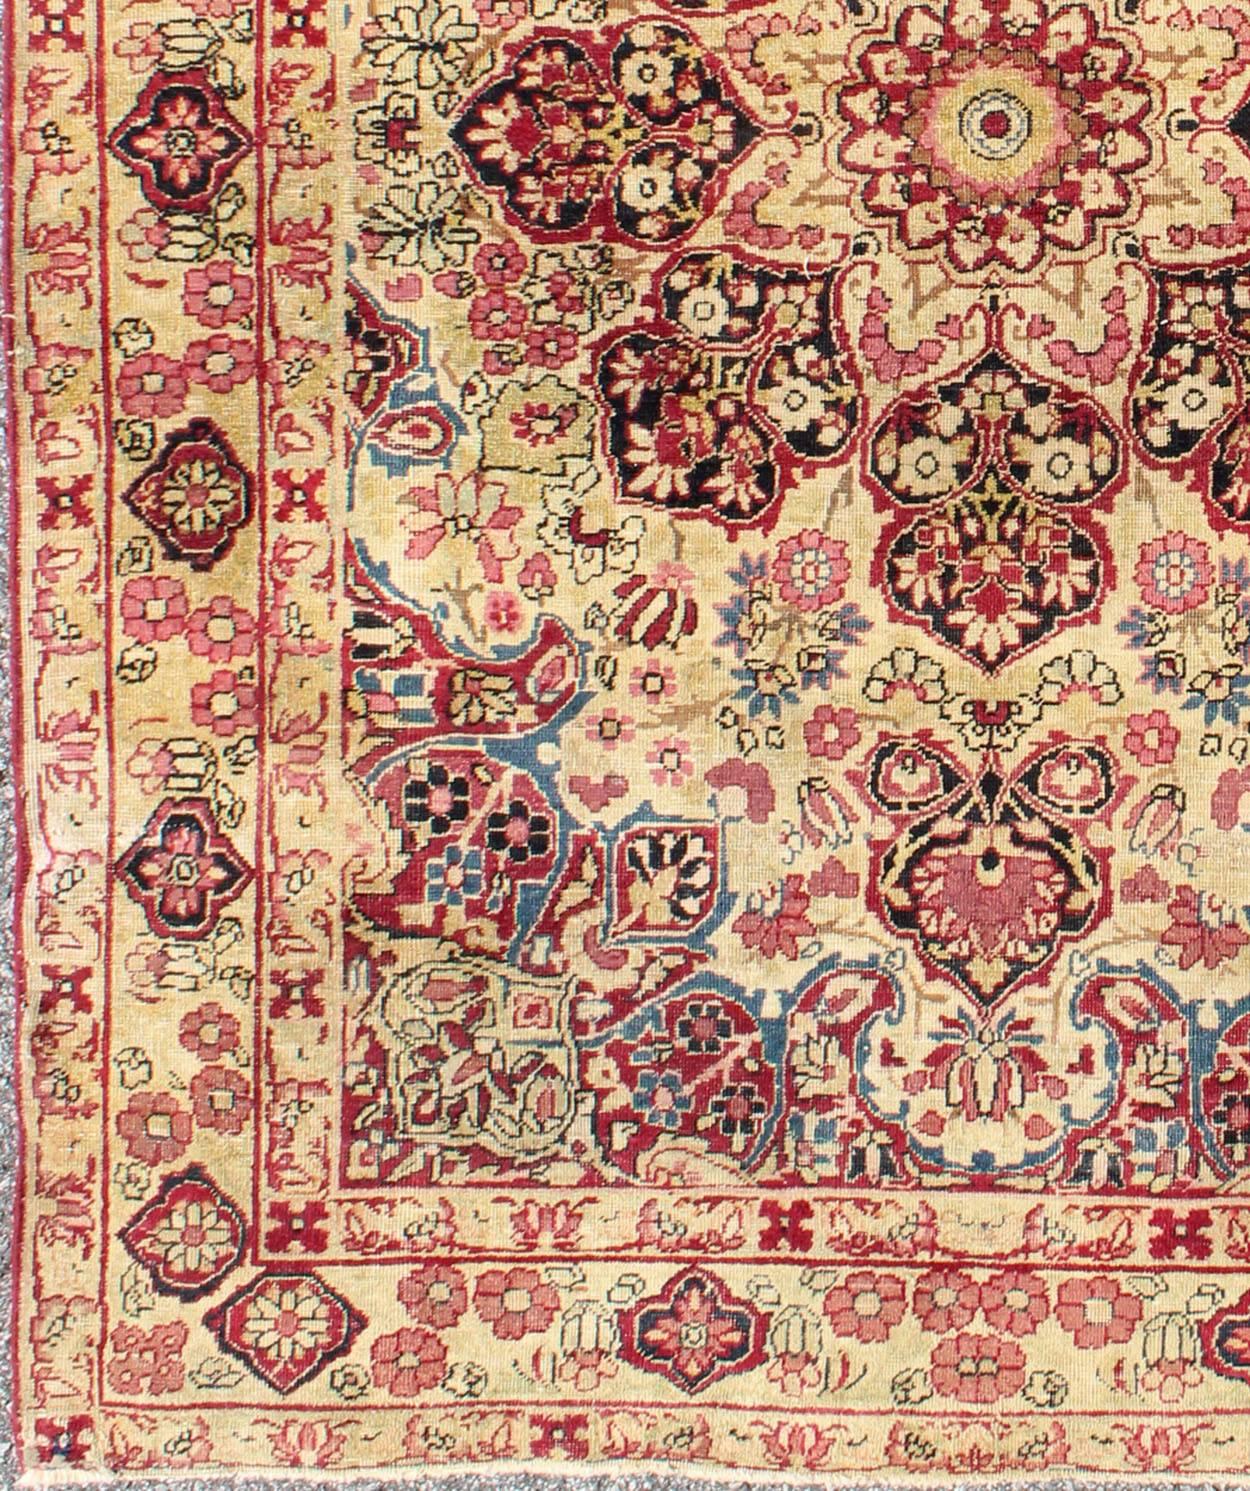 Late 19th century antique Lavar-Kerman rug with red and pink floral medallion, rug j10-1003, country of origin / type: Iran / Kerman, circa 1890

This antique Persian Lavar Kerman rug, circa 1890 from the late 19th century features an ivory field,